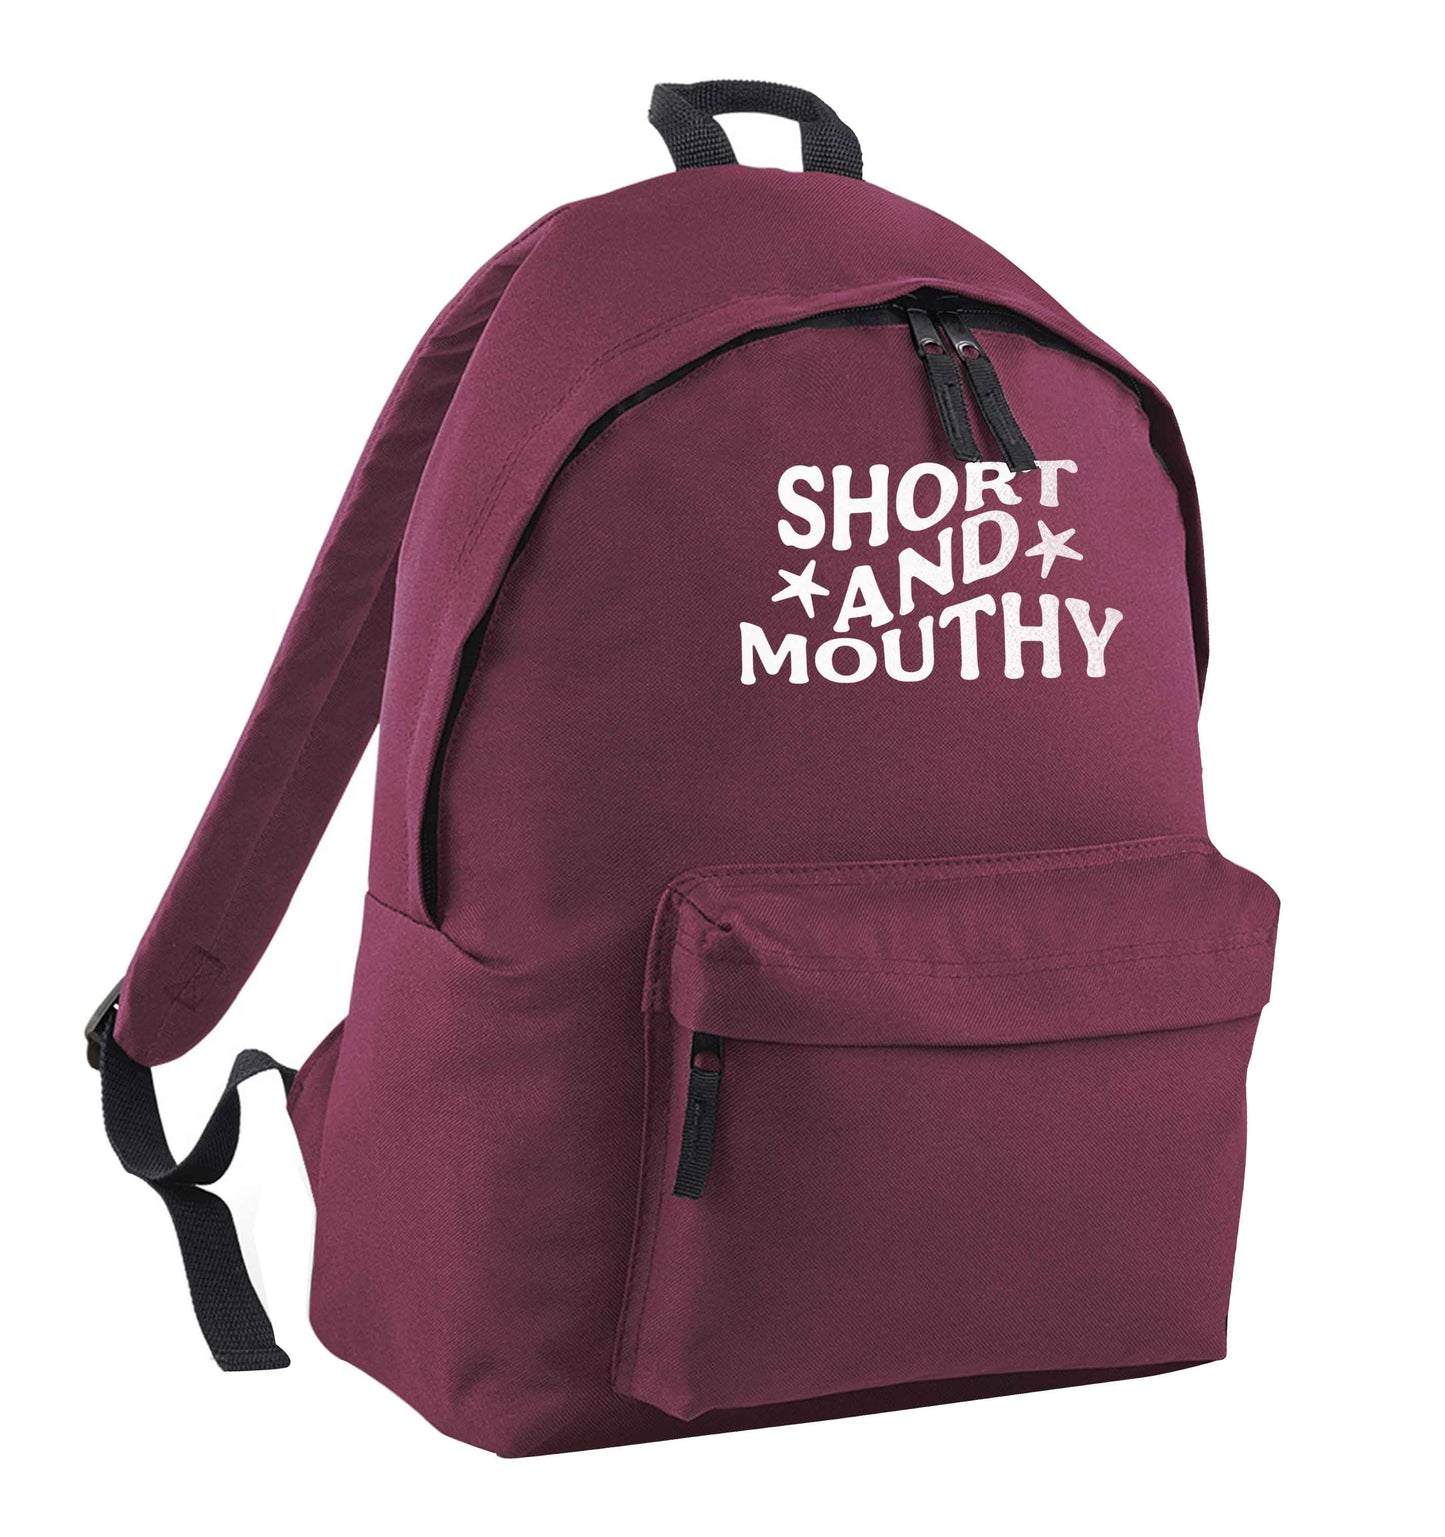 Short and mouthy maroon adults backpack